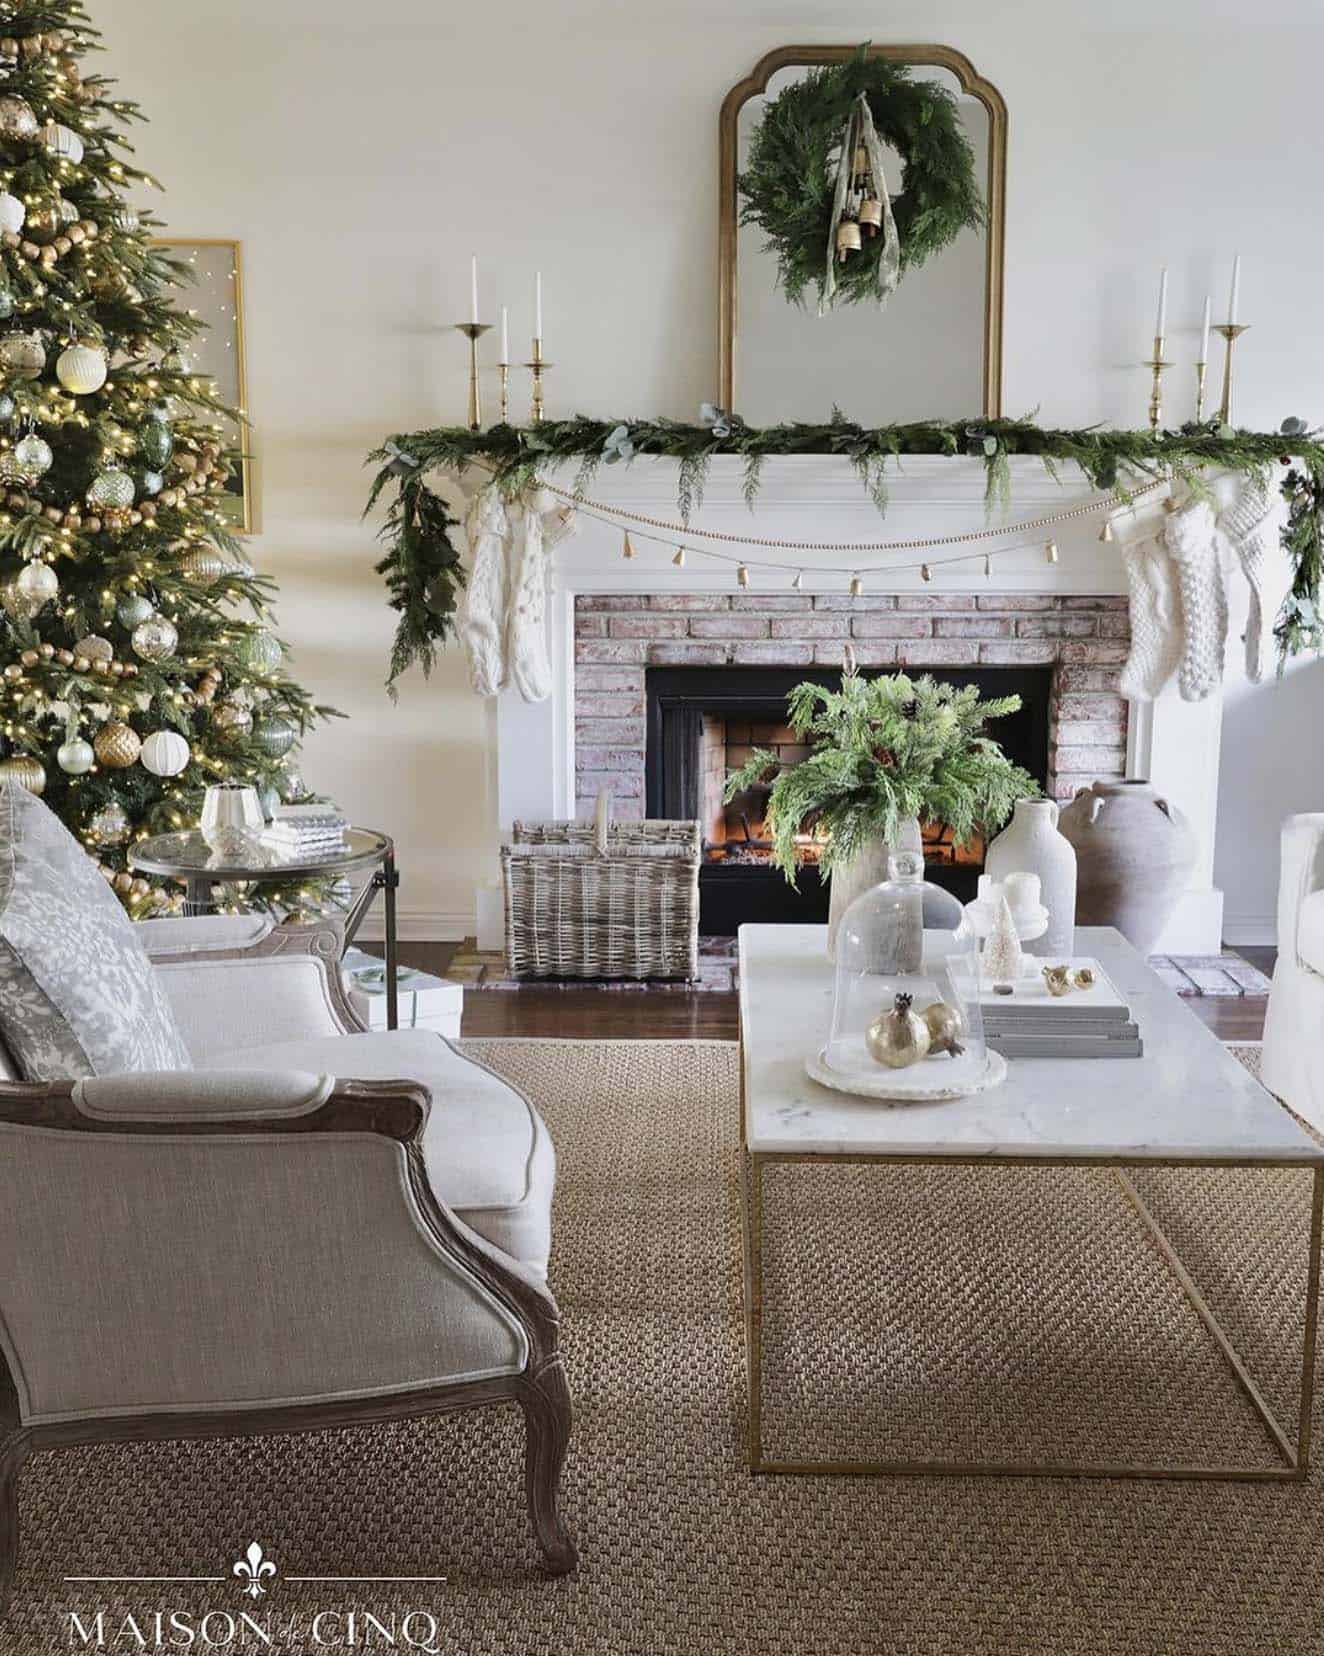 French-inspired Christmas in the living room with a tree and garland on the fireplace mantel